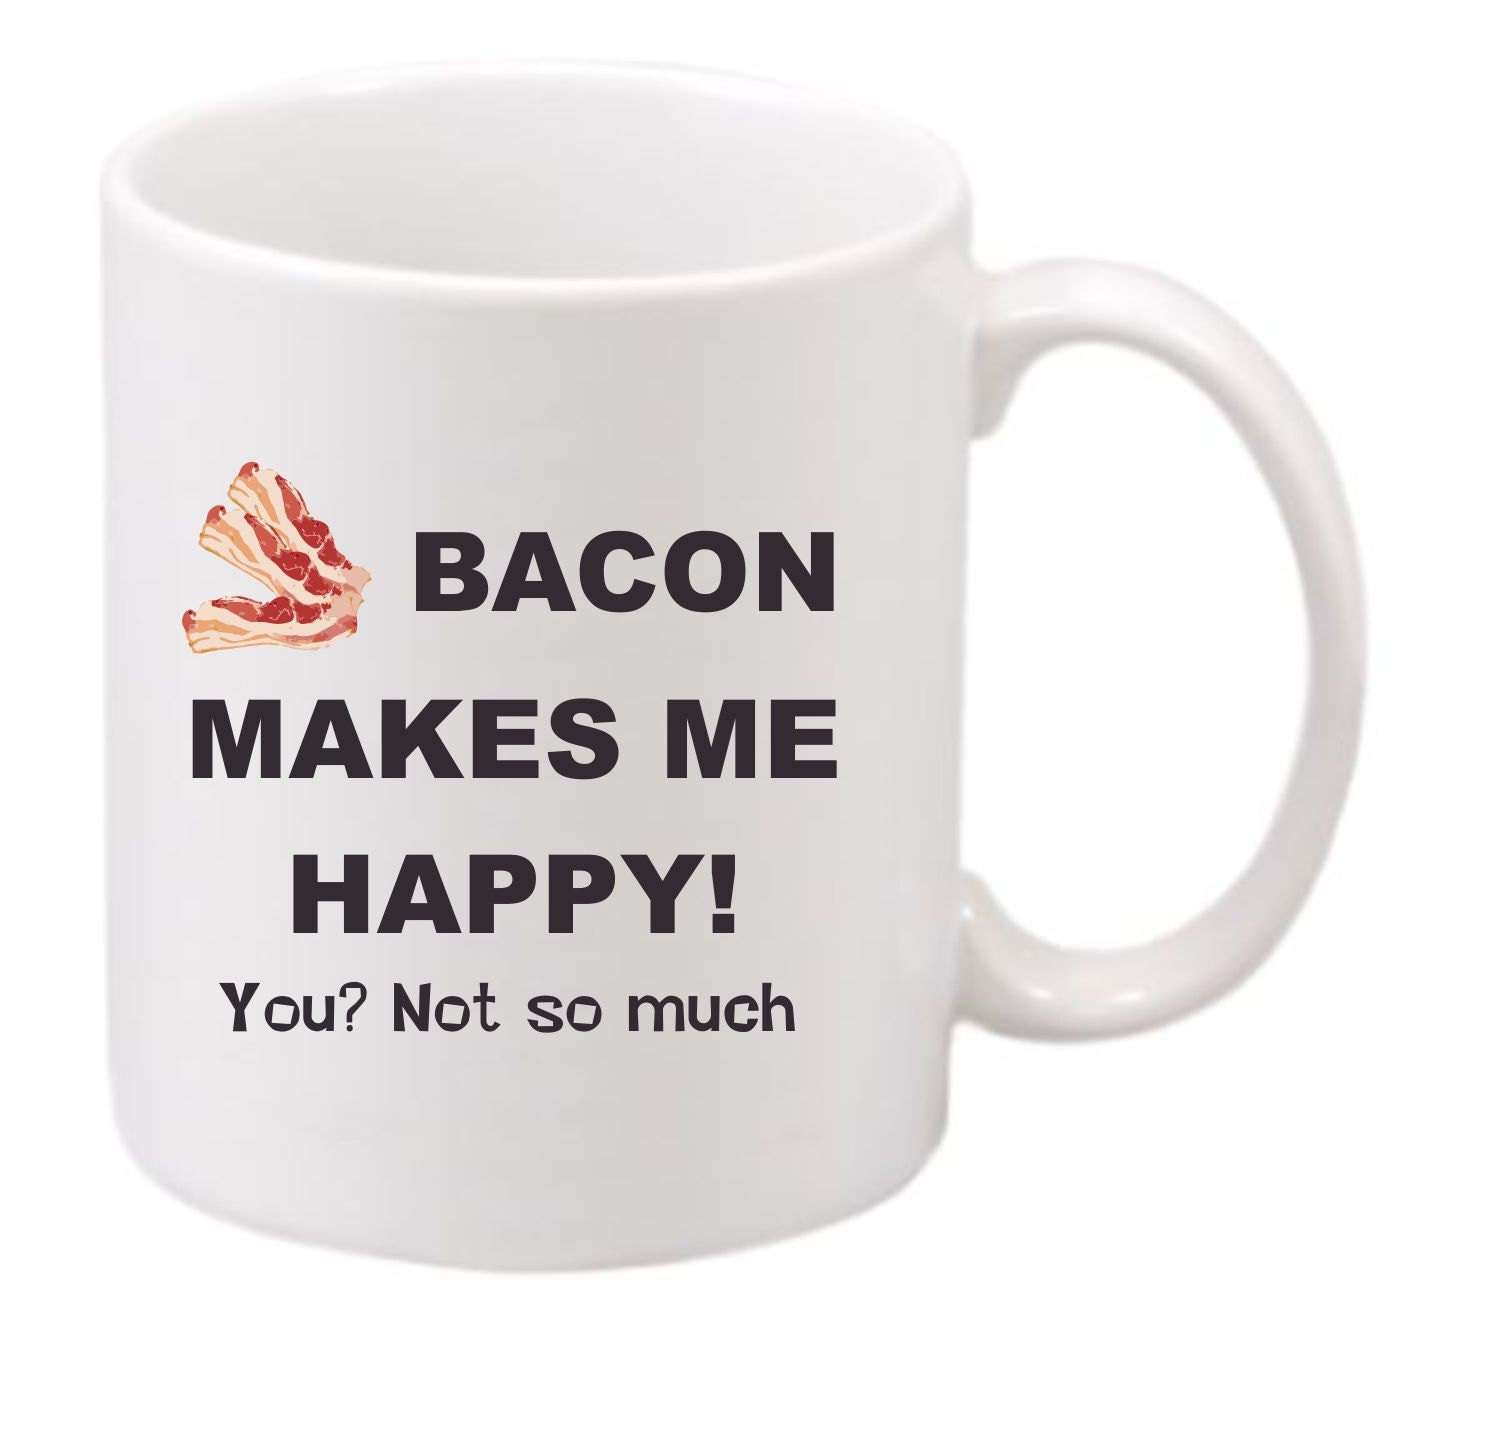 Bacon Makes Me Happy You Not So Much coffee mug201 funny